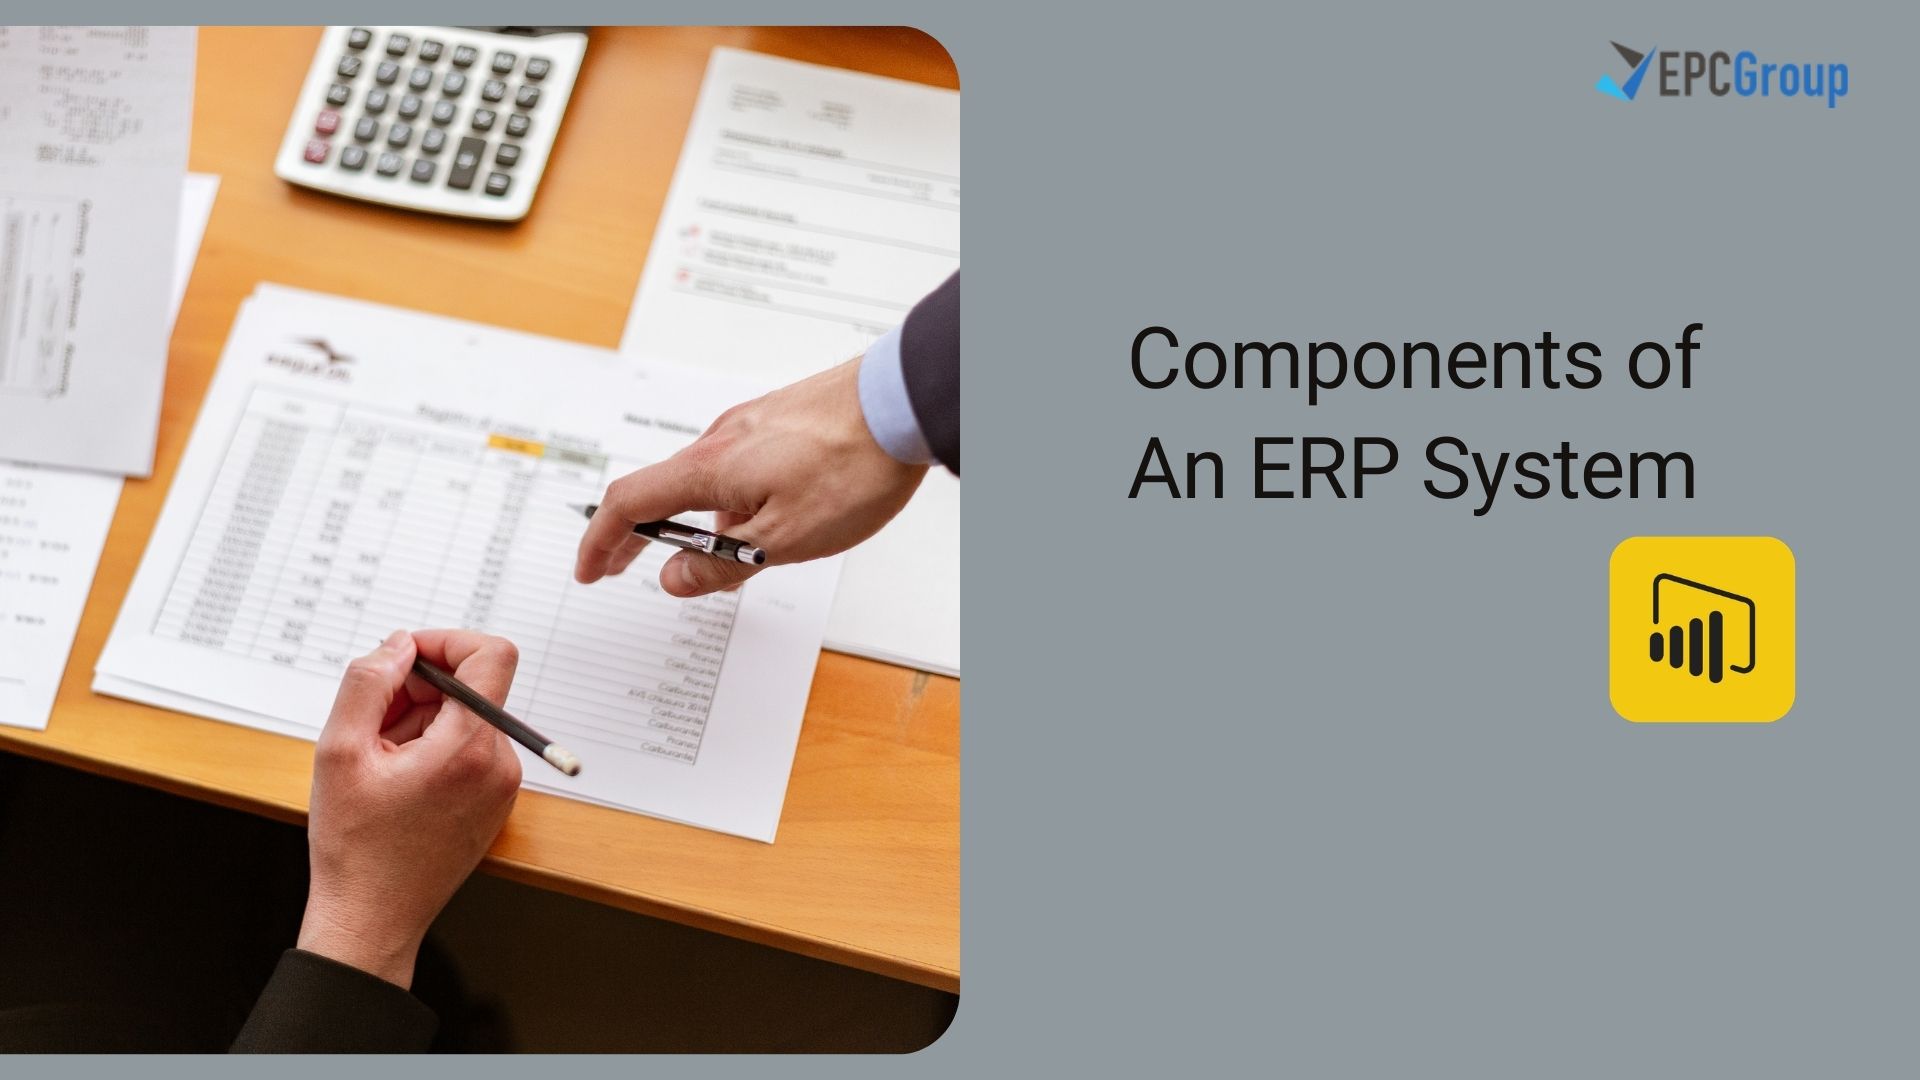 What Are The Core Components of An ERP System?